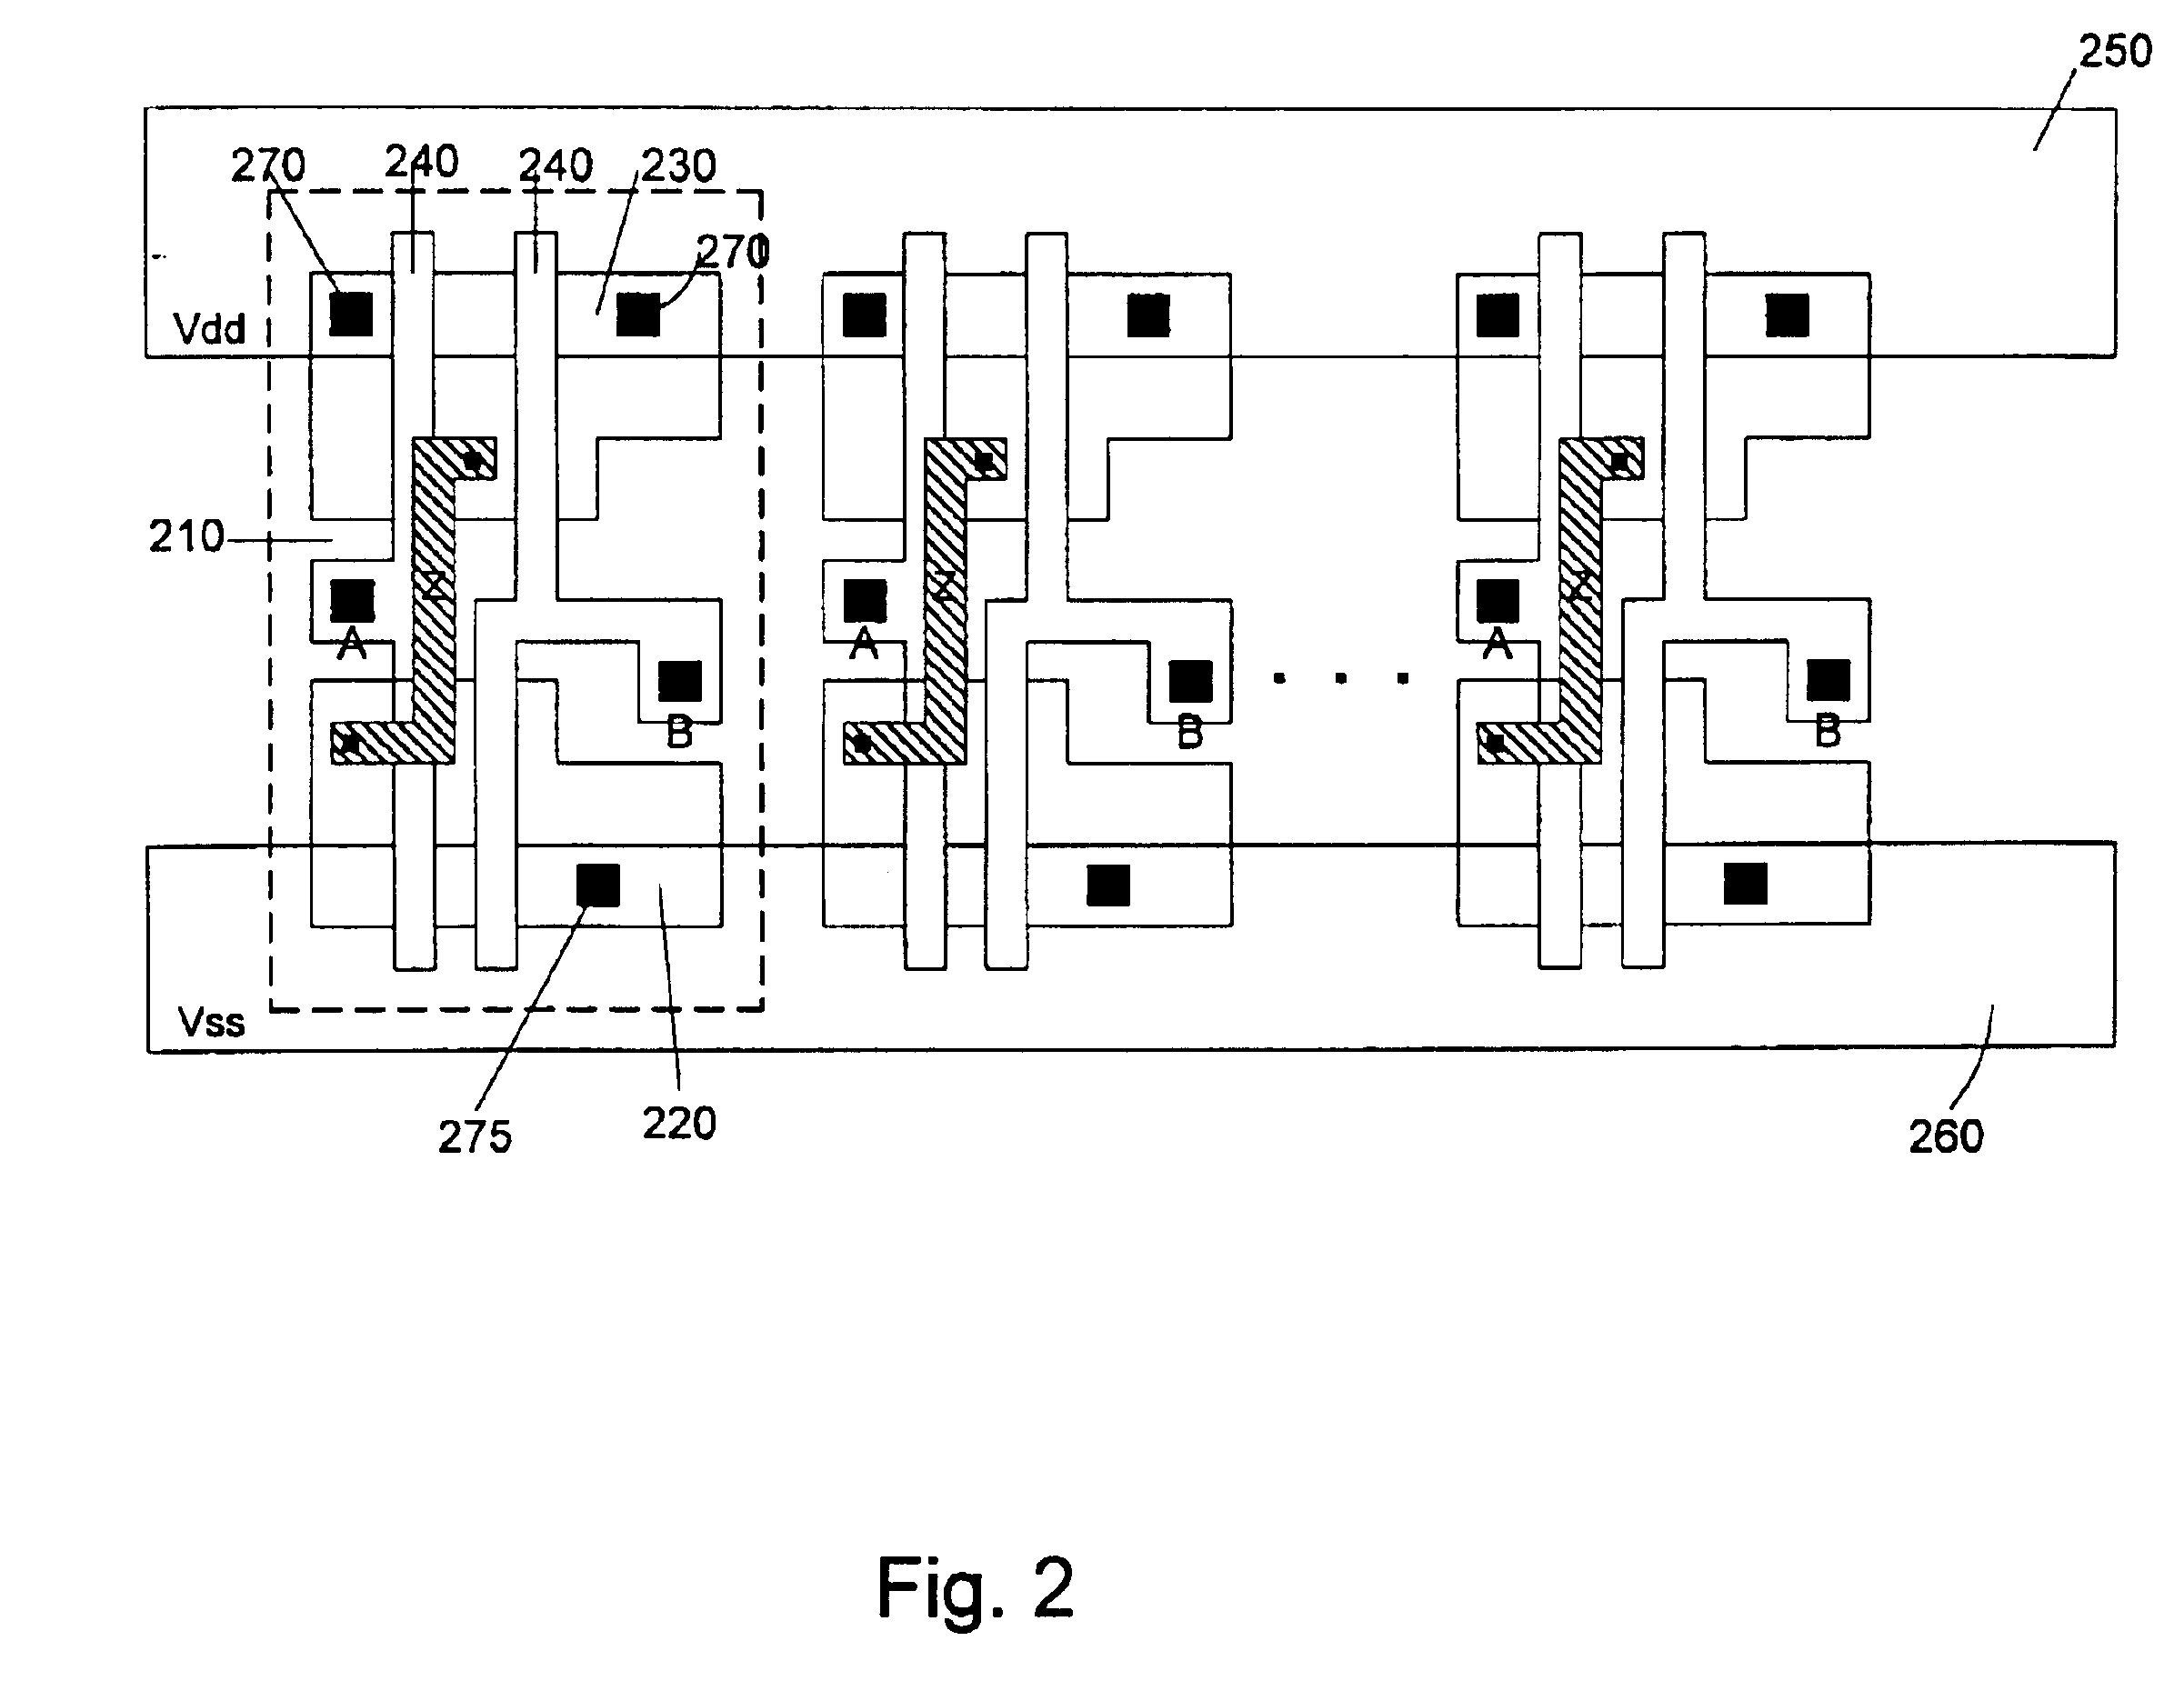 Dual-height cell with variable width power rail architecture